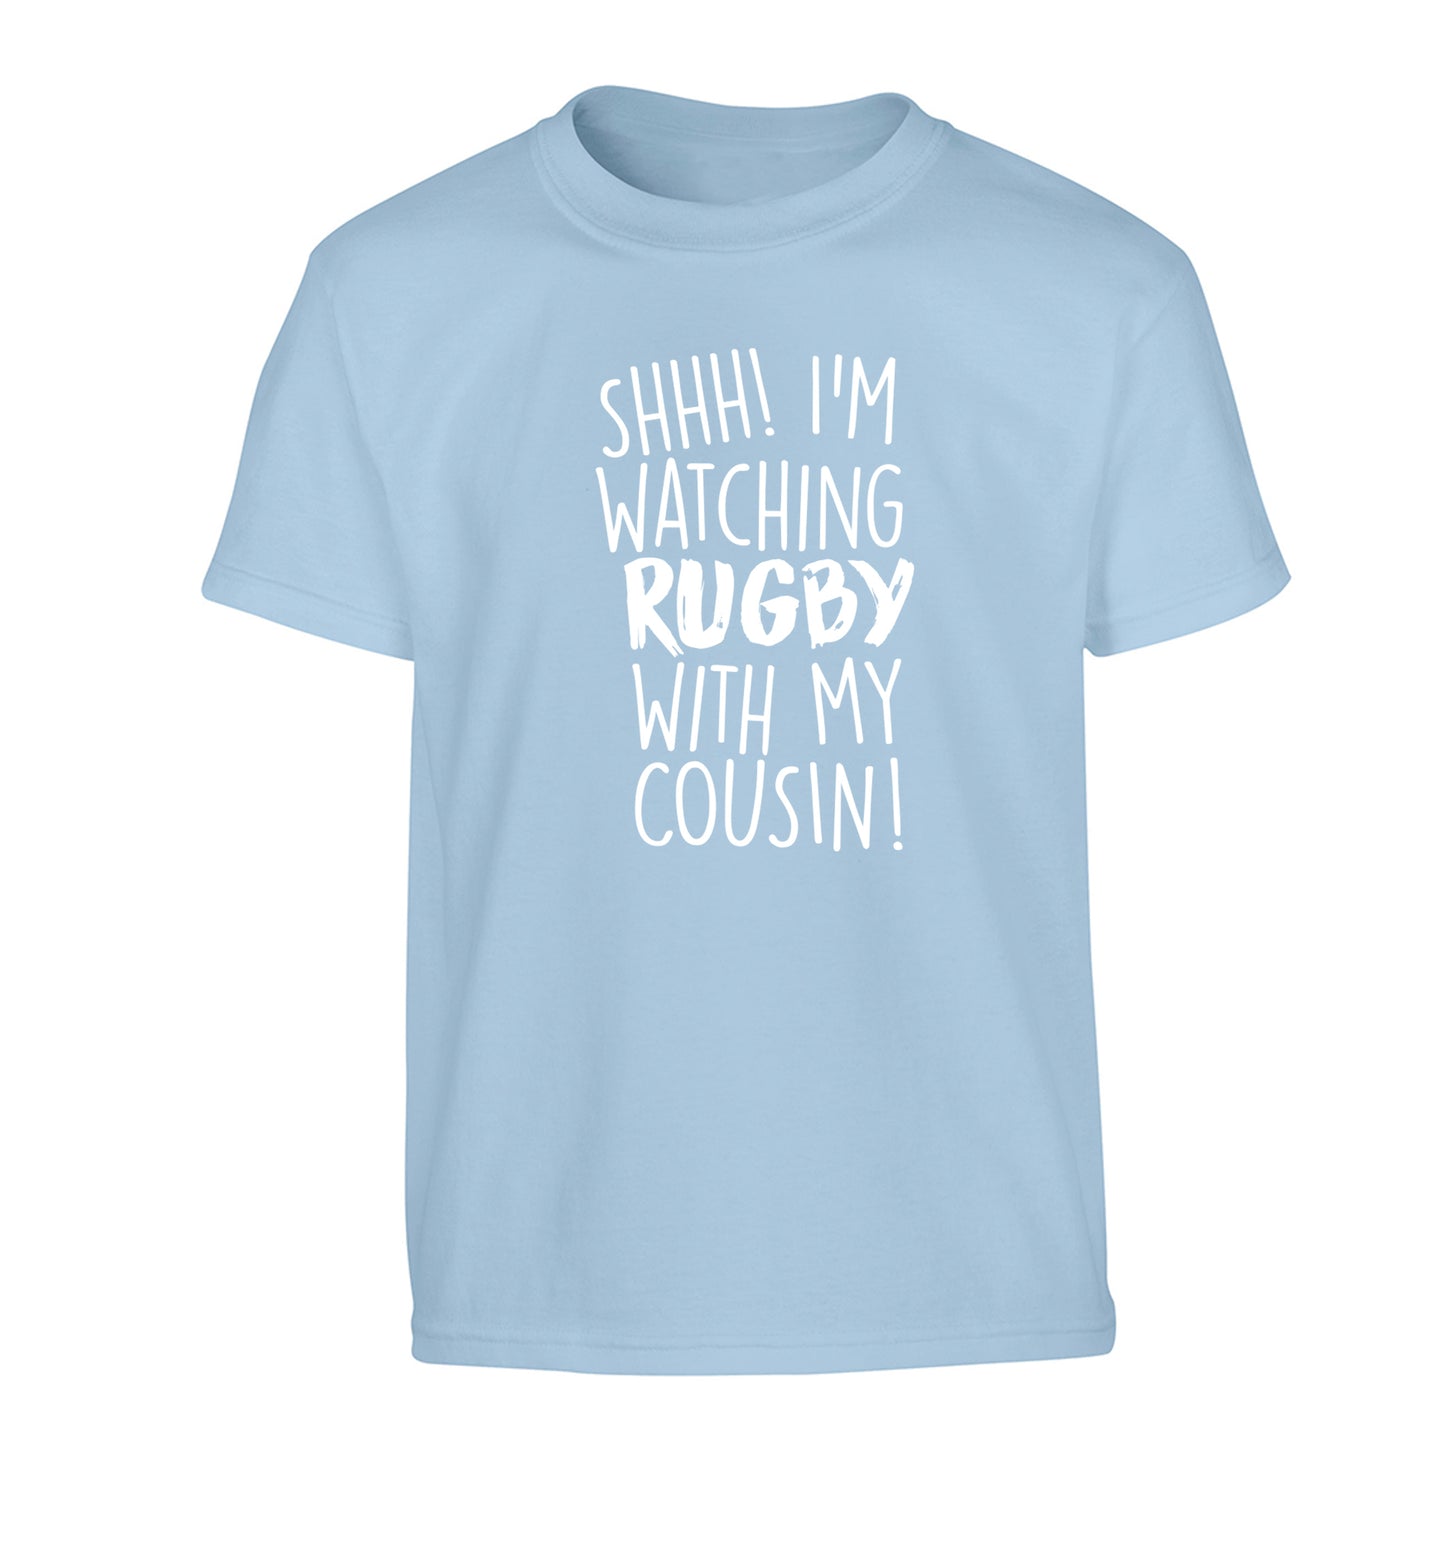 Shhh I'm watching rugby with my cousin Children's light blue Tshirt 12-13 Years